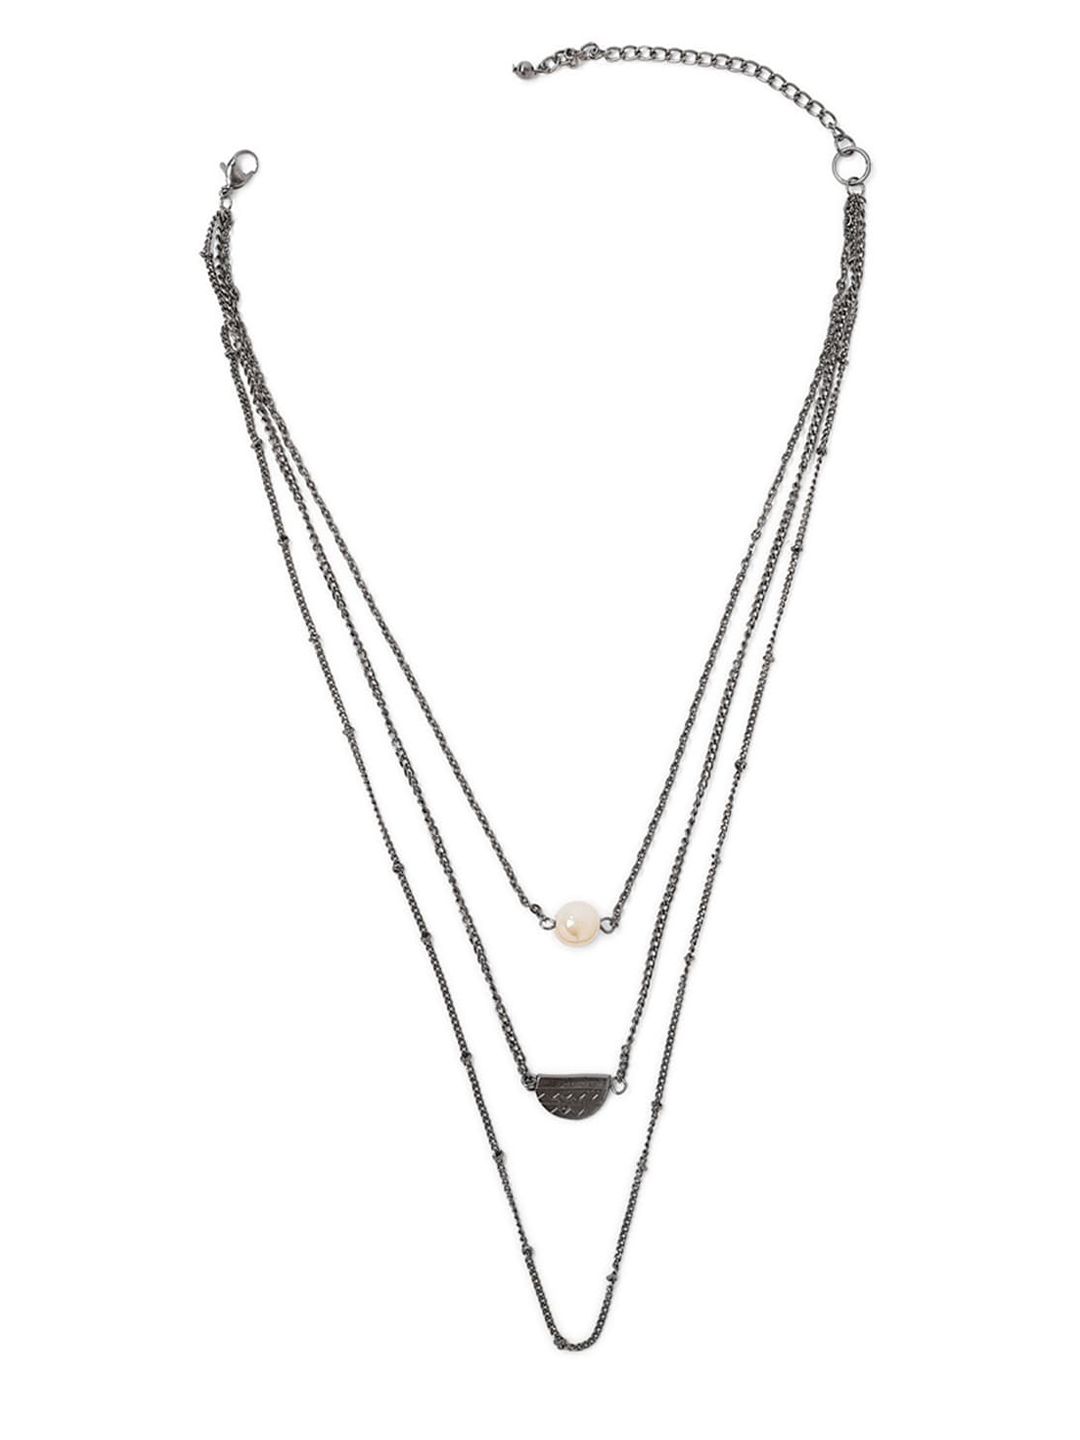 FOREVER 21 Gun Metal-Toned & White Layered Necklace Price in India